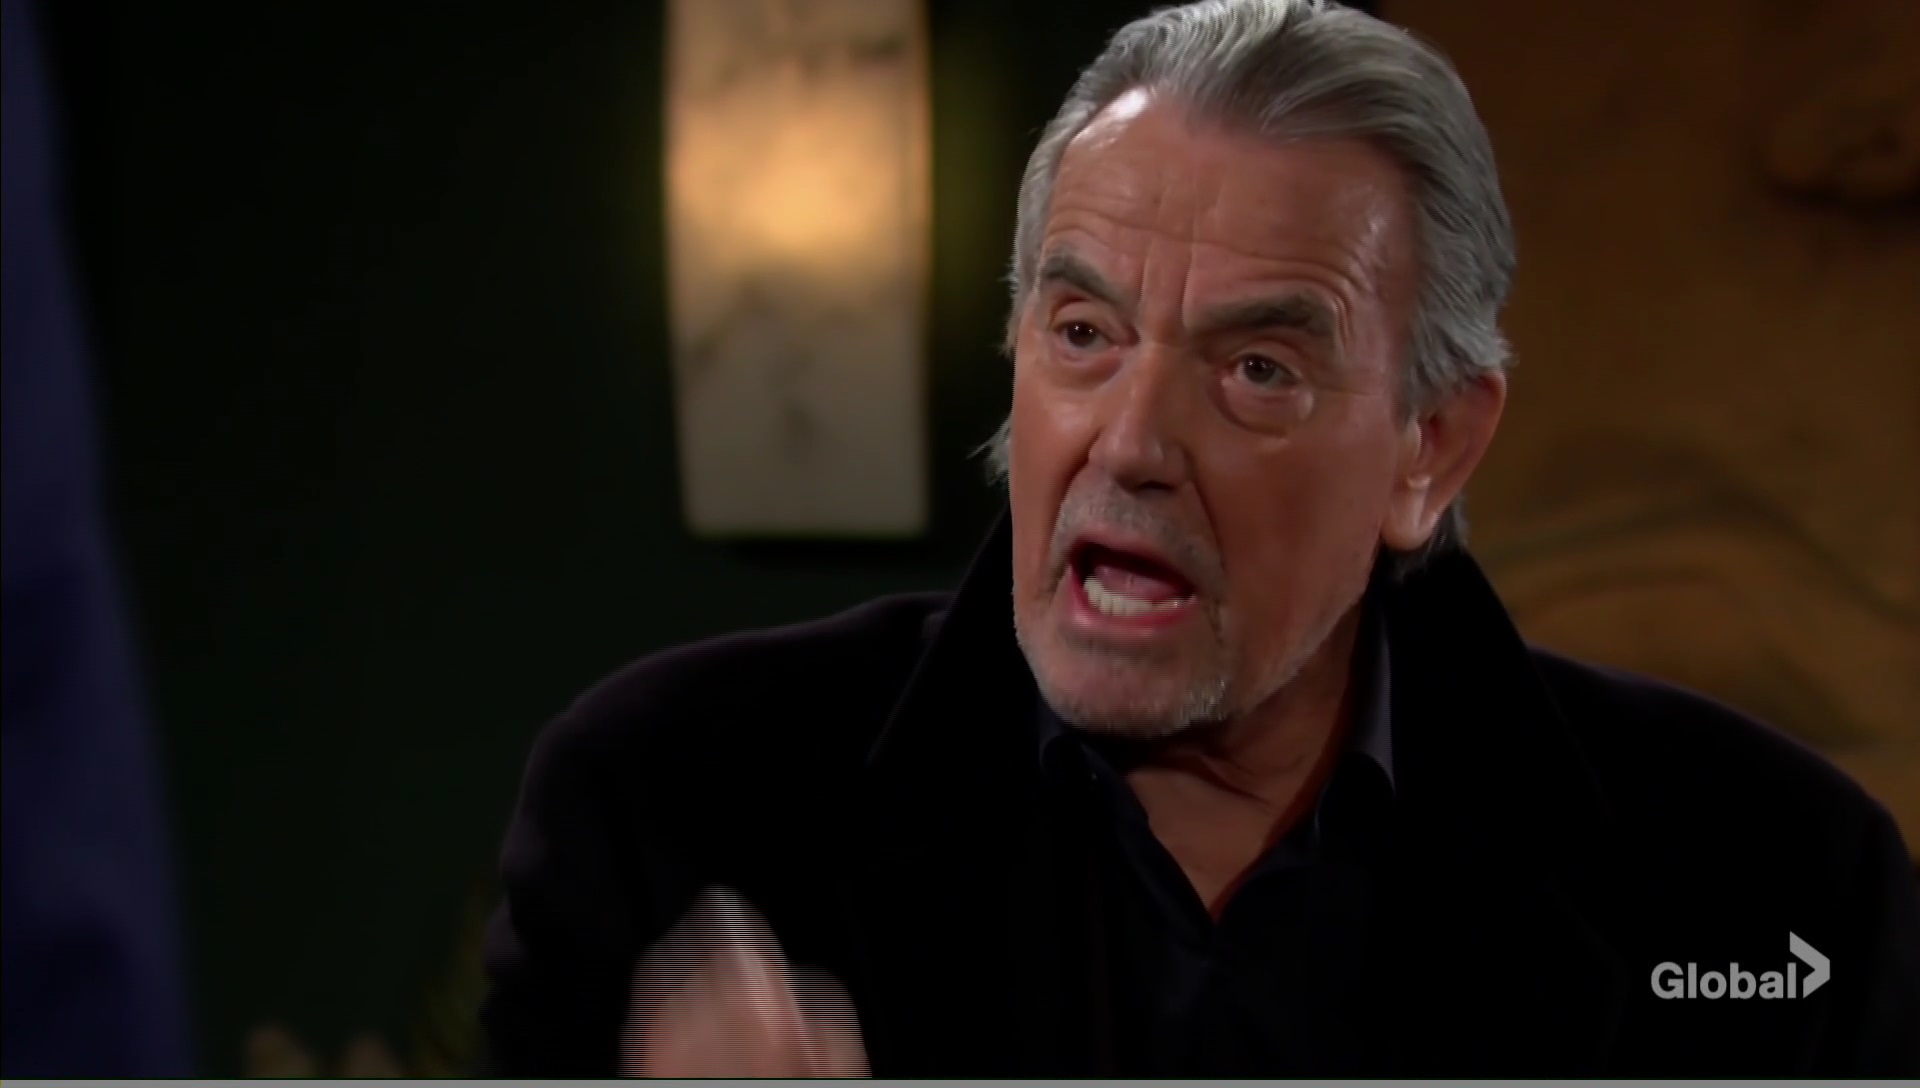 victor is yelling at ashland young and restless